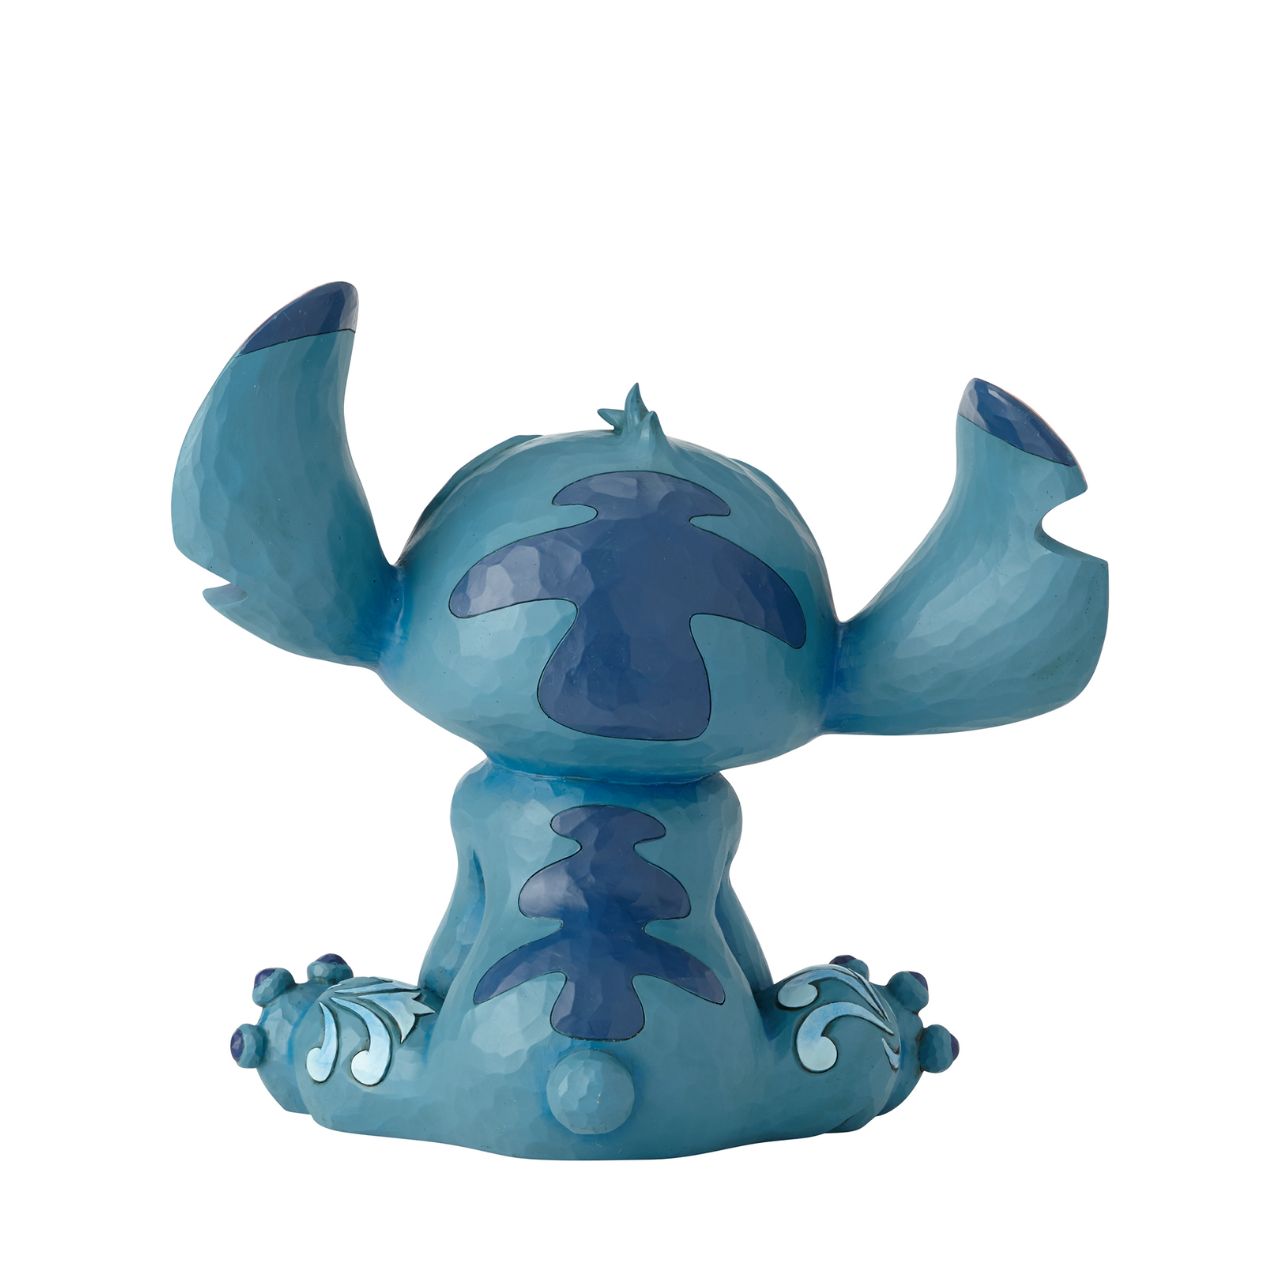 Disney Traditions Big Trouble Stitch Statement Figurine  It's hard to believe this sweet face could be behind so much chaos| Stitch, the troublesome alien from Disney's "Lilo and Stitch" strikes an innocent pose in this handcrafted design, sculpted from cast stone and hand-painted with whimsical folk-art details.